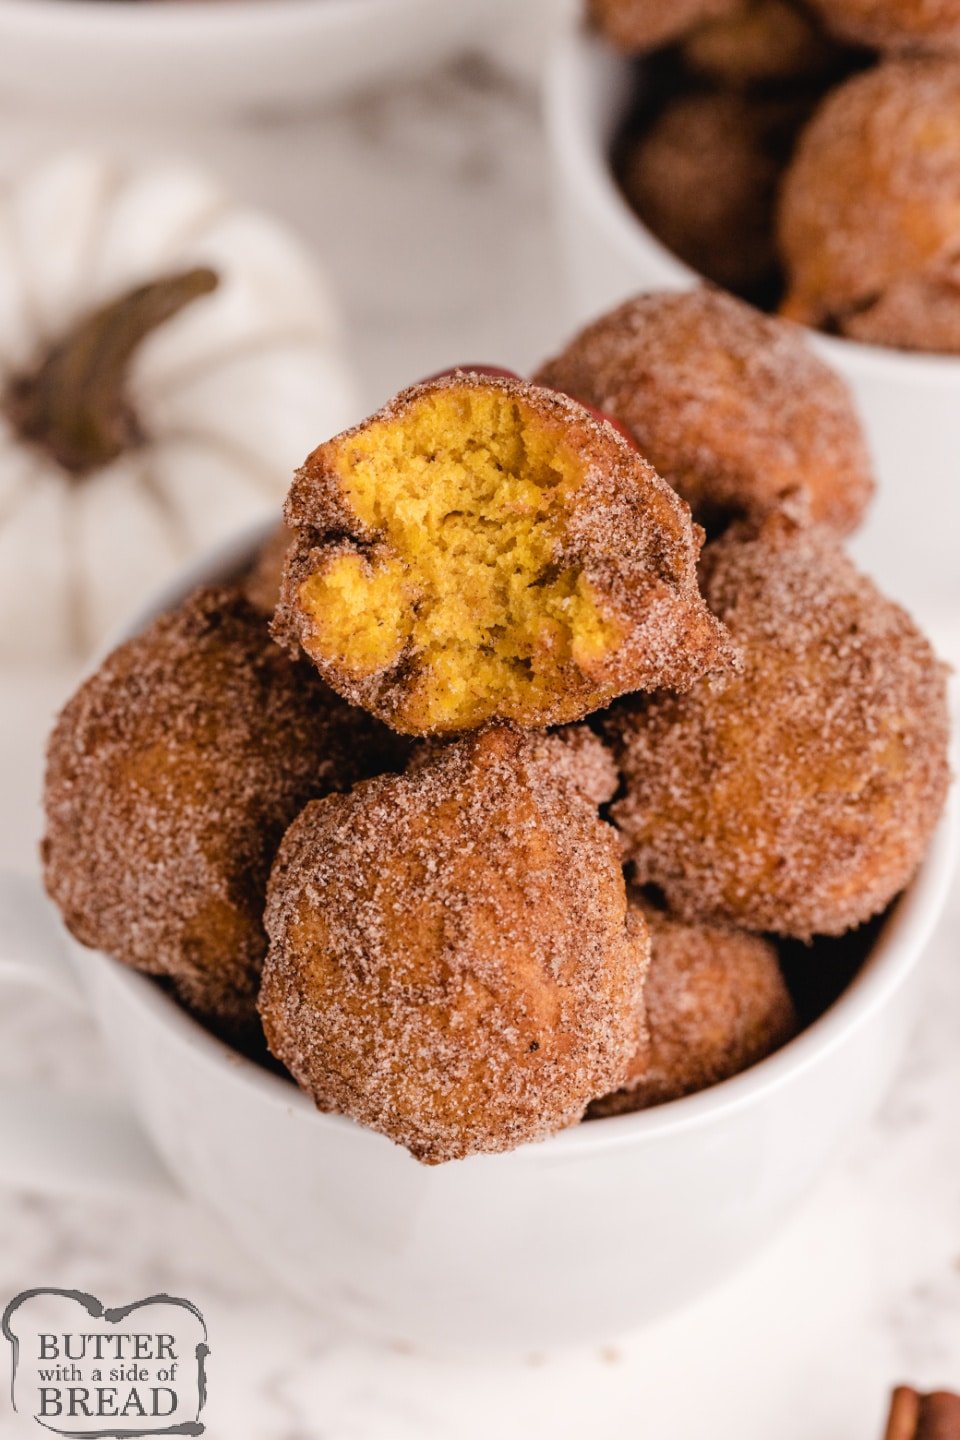 Pumpkin Donut Holes are soft, delicious and easy to make - no yeast necessary! Coated in cinnamon and sugar, and packed with pumpkin, this donut hole recipe is perfect for fall!